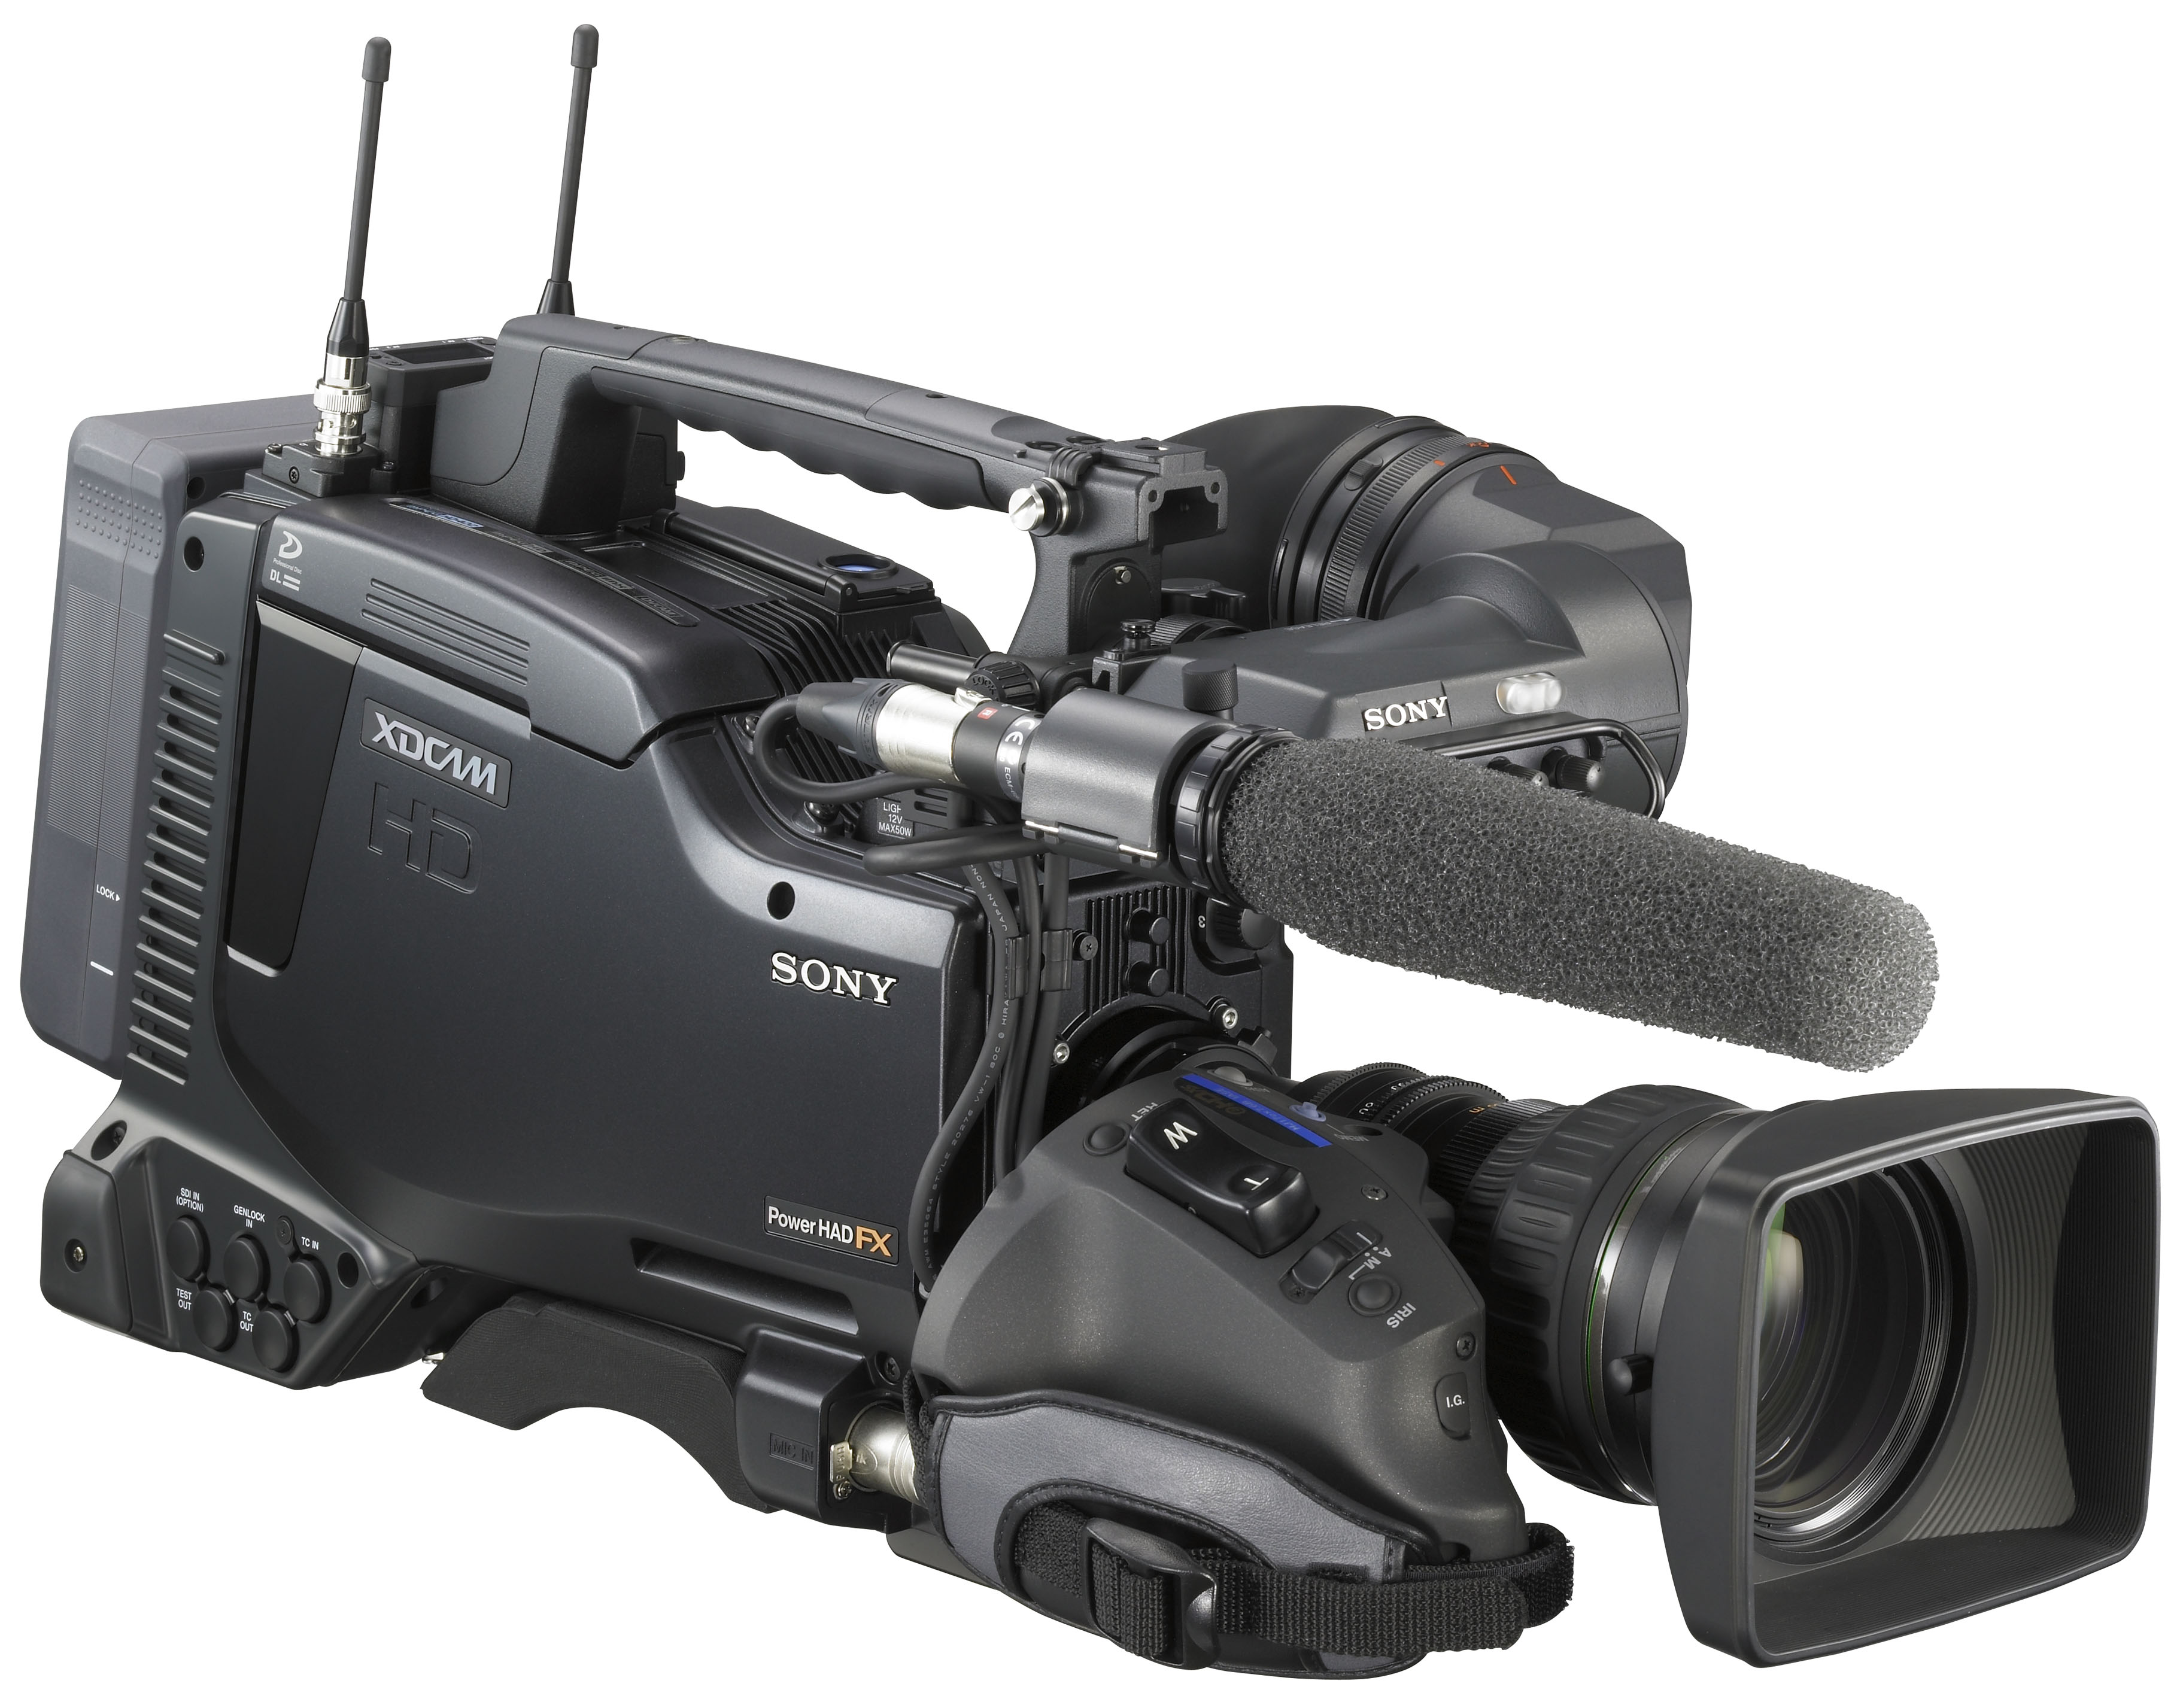 Sony PDW 700 HD XDcam camcorder